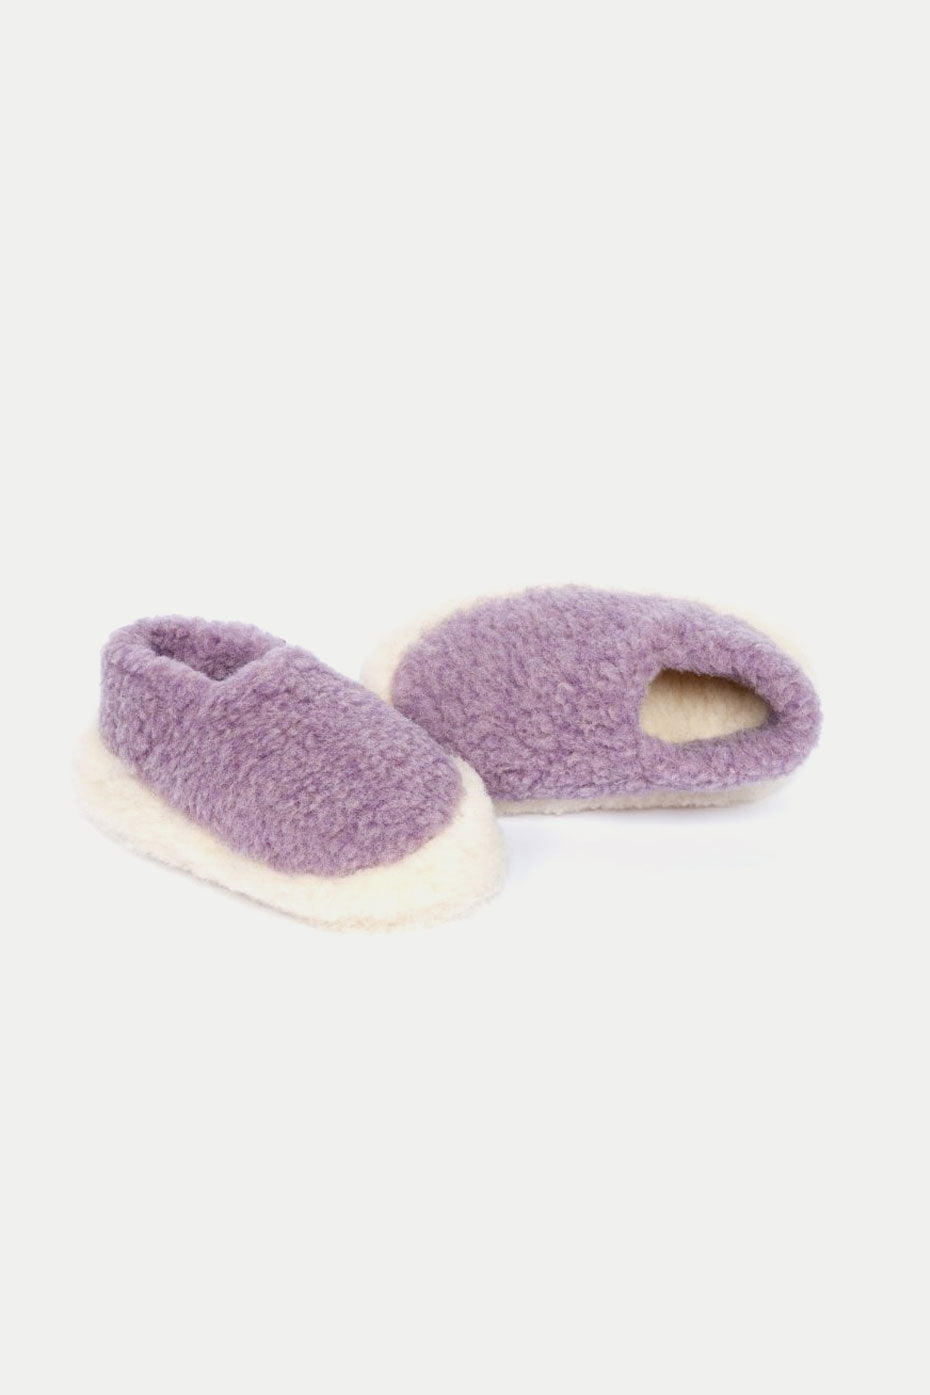 Siberian Lilac Slippers